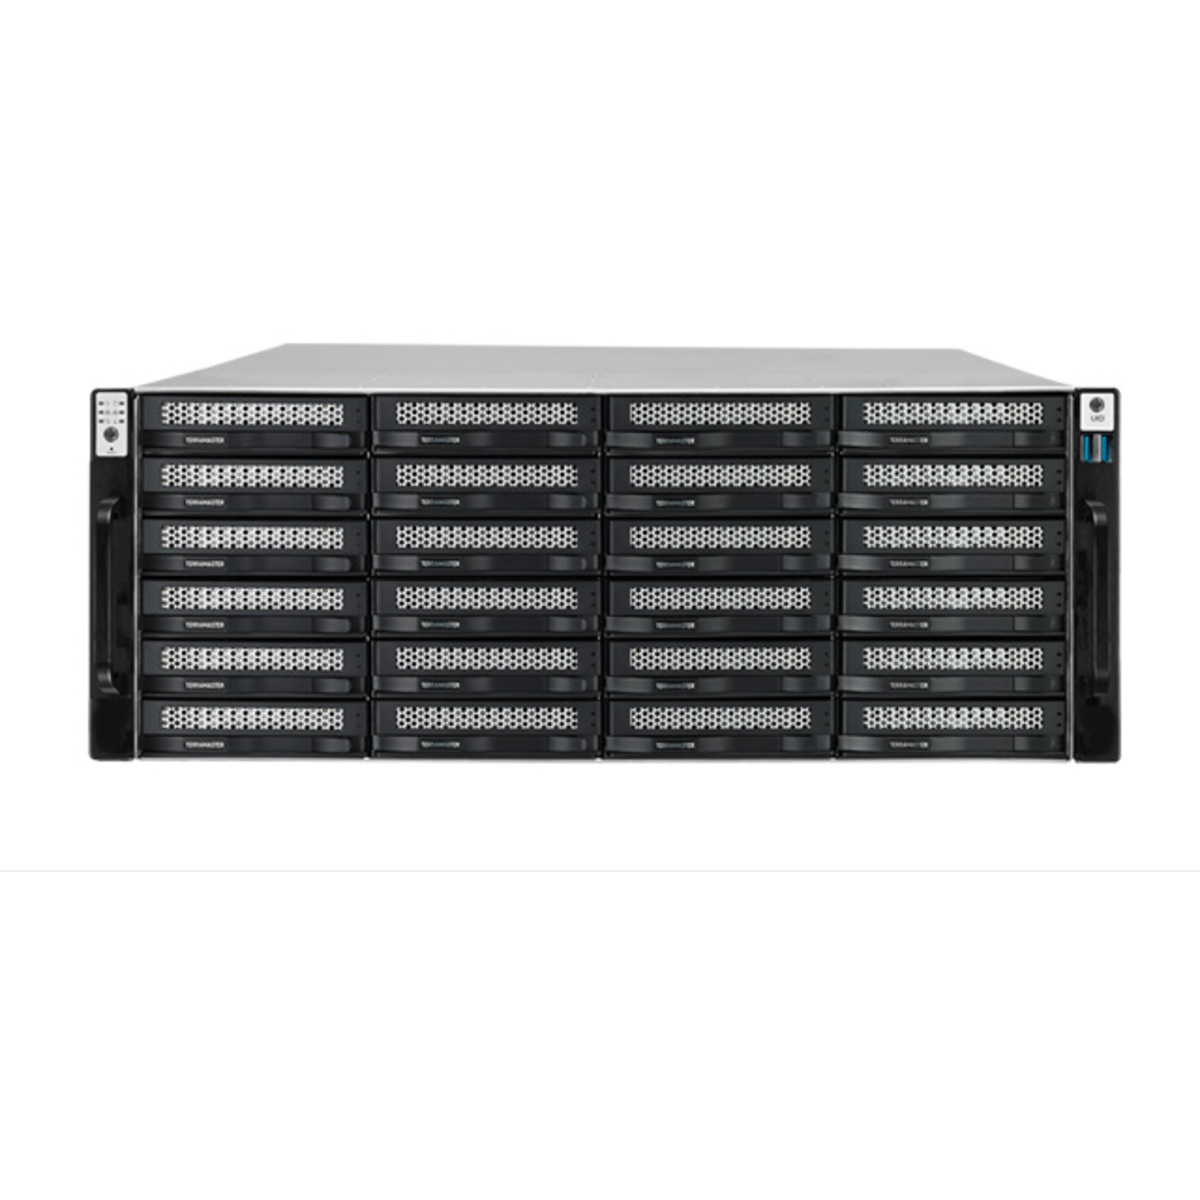 TerraMaster U24-722-2224 192tb 24-Bay RackMount Large Business / Enterprise NAS - Network Attached Storage Device 24x8tb Seagate IronWolf Pro ST8000NT001 3.5 7200rpm SATA 6Gb/s HDD NAS Class Drives Installed - Burn-In Tested - ON SALE U24-722-2224